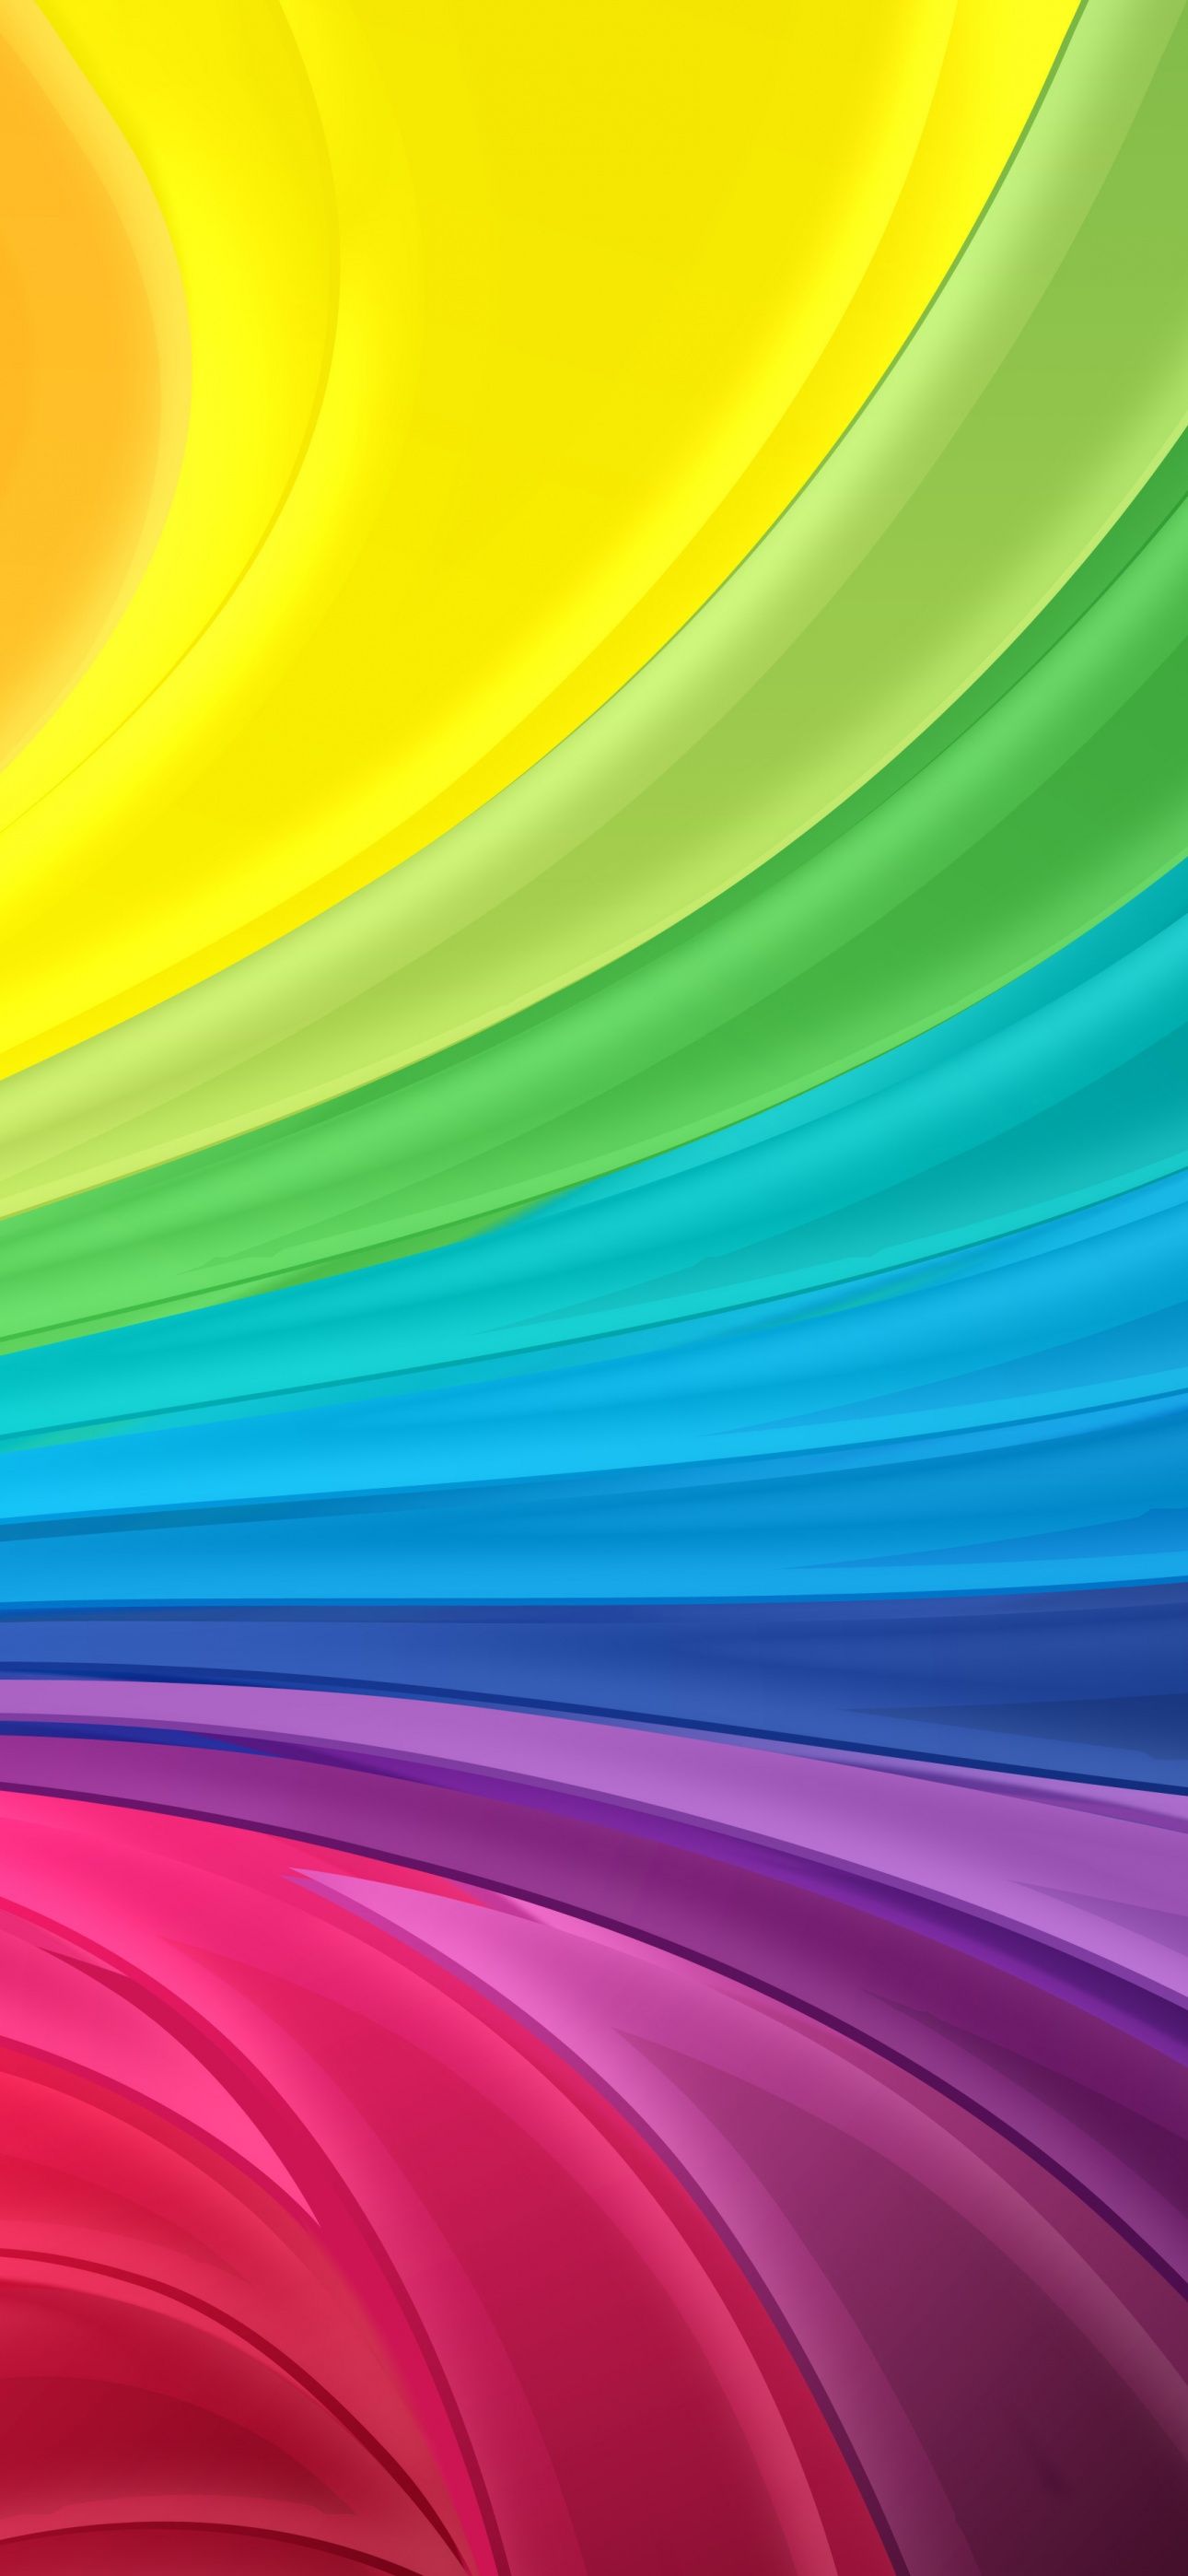 A wallpaper with many colors - Colorful